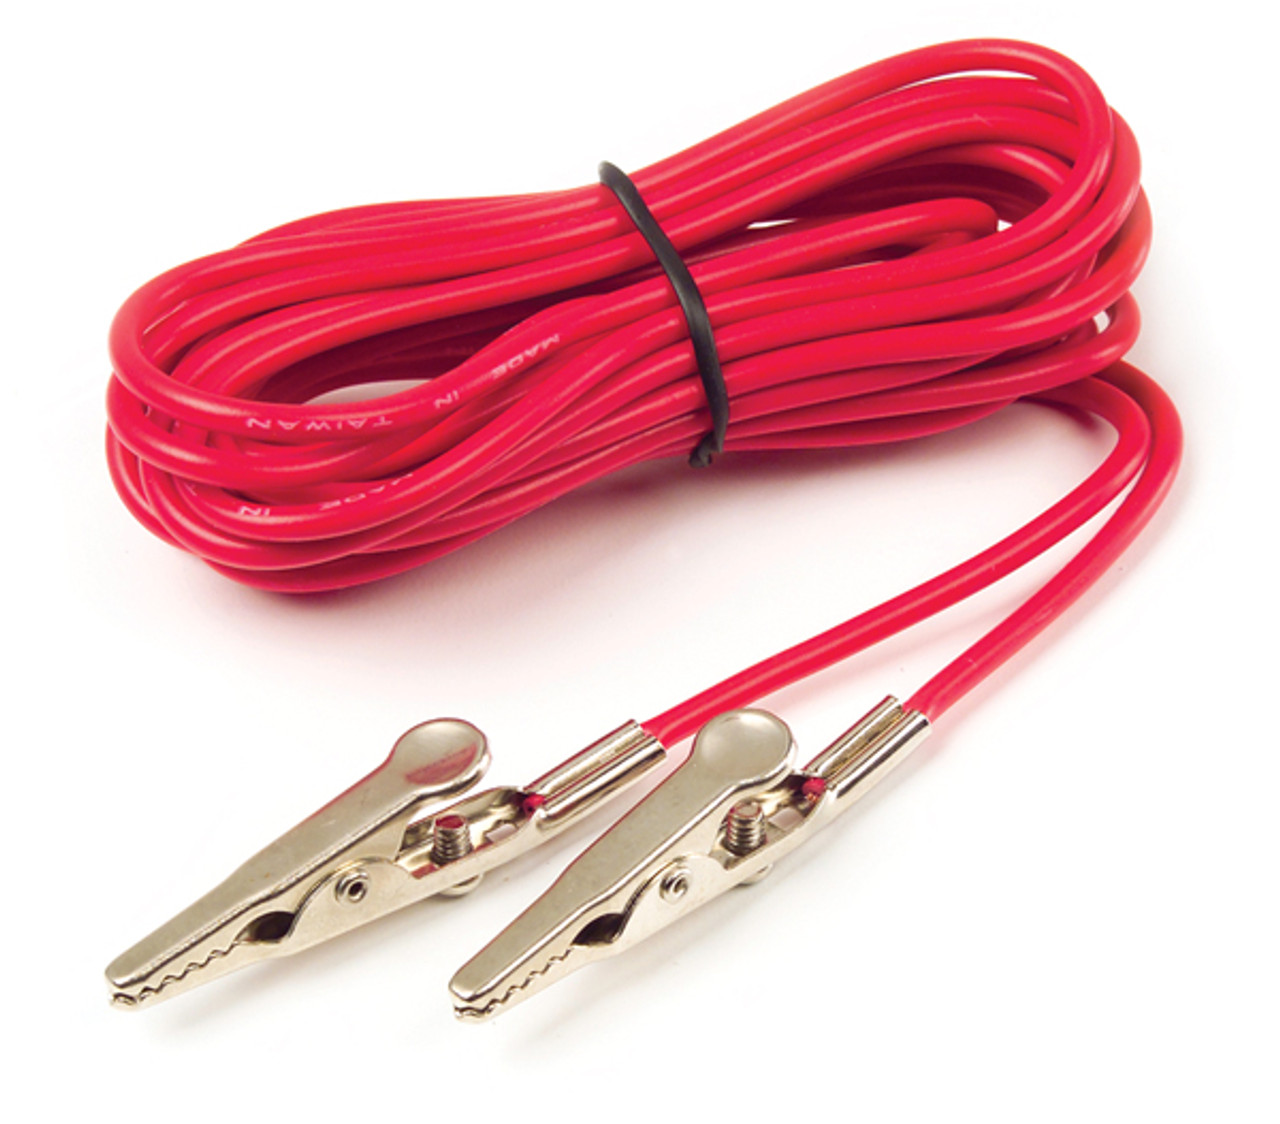 Alligator Clips & Test Leads 10' - Red  84-9615